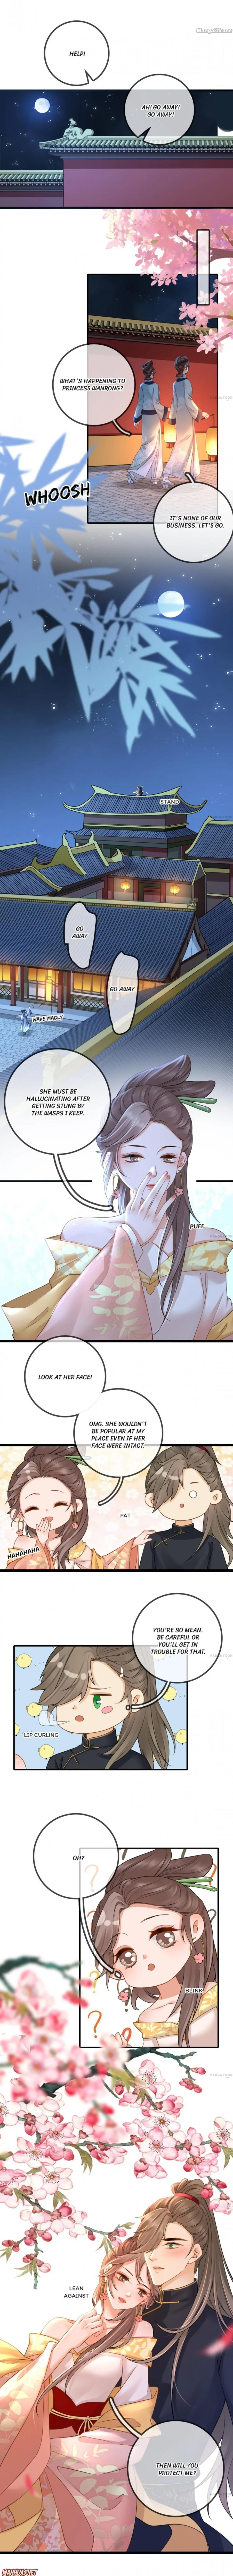 Your Highness, Enchanted By Me! - Page 1